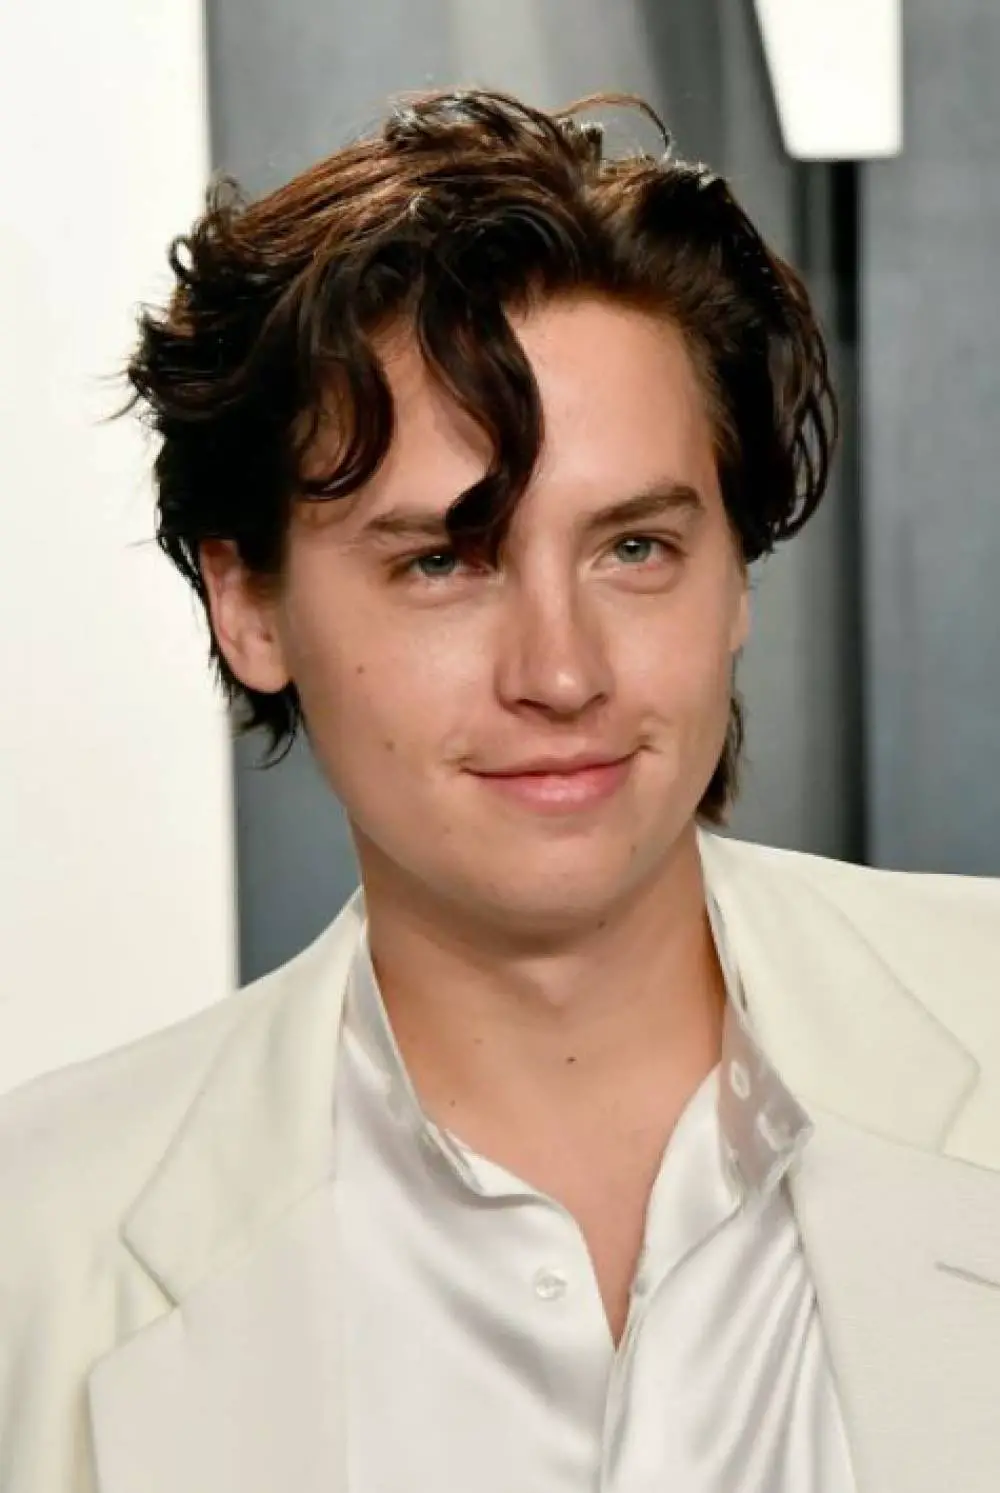 Details On Cole Sprouse Career & Girlfriend He Is Dating Now!